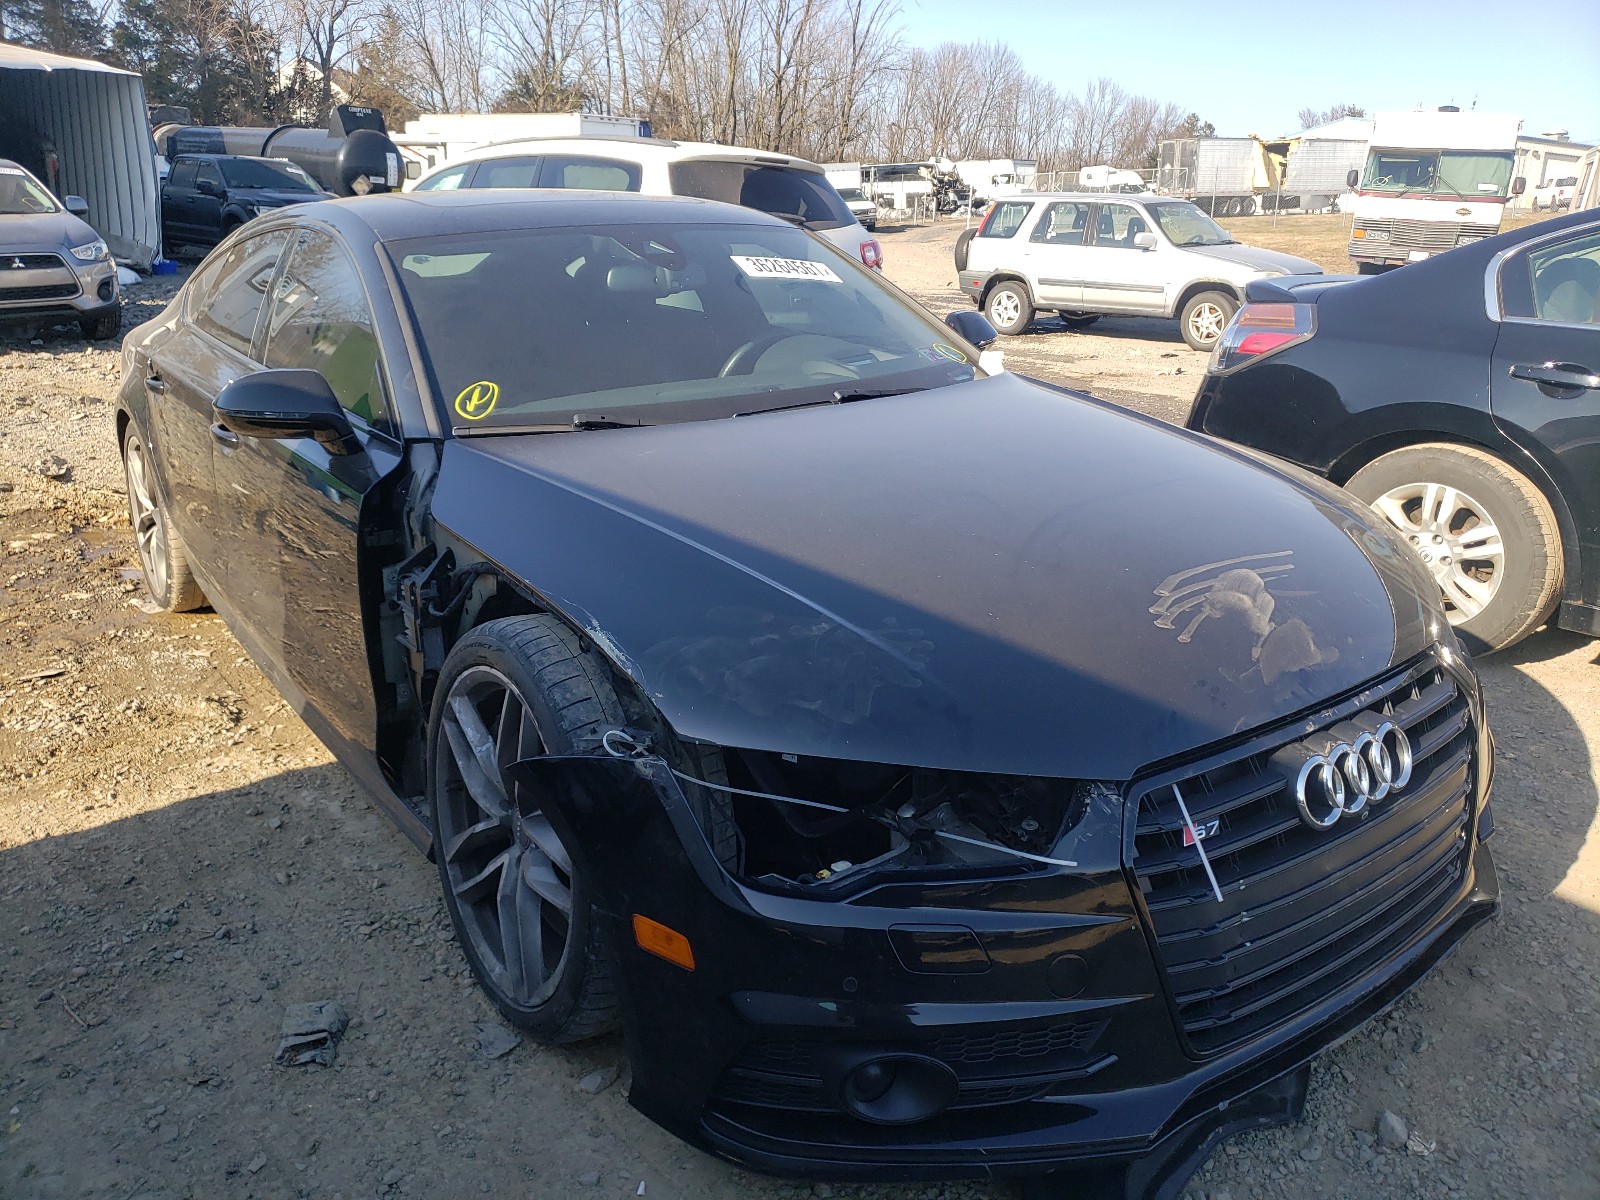 WAUW2AFC6GN141645  - Audi S7 2016 IMG - 1 